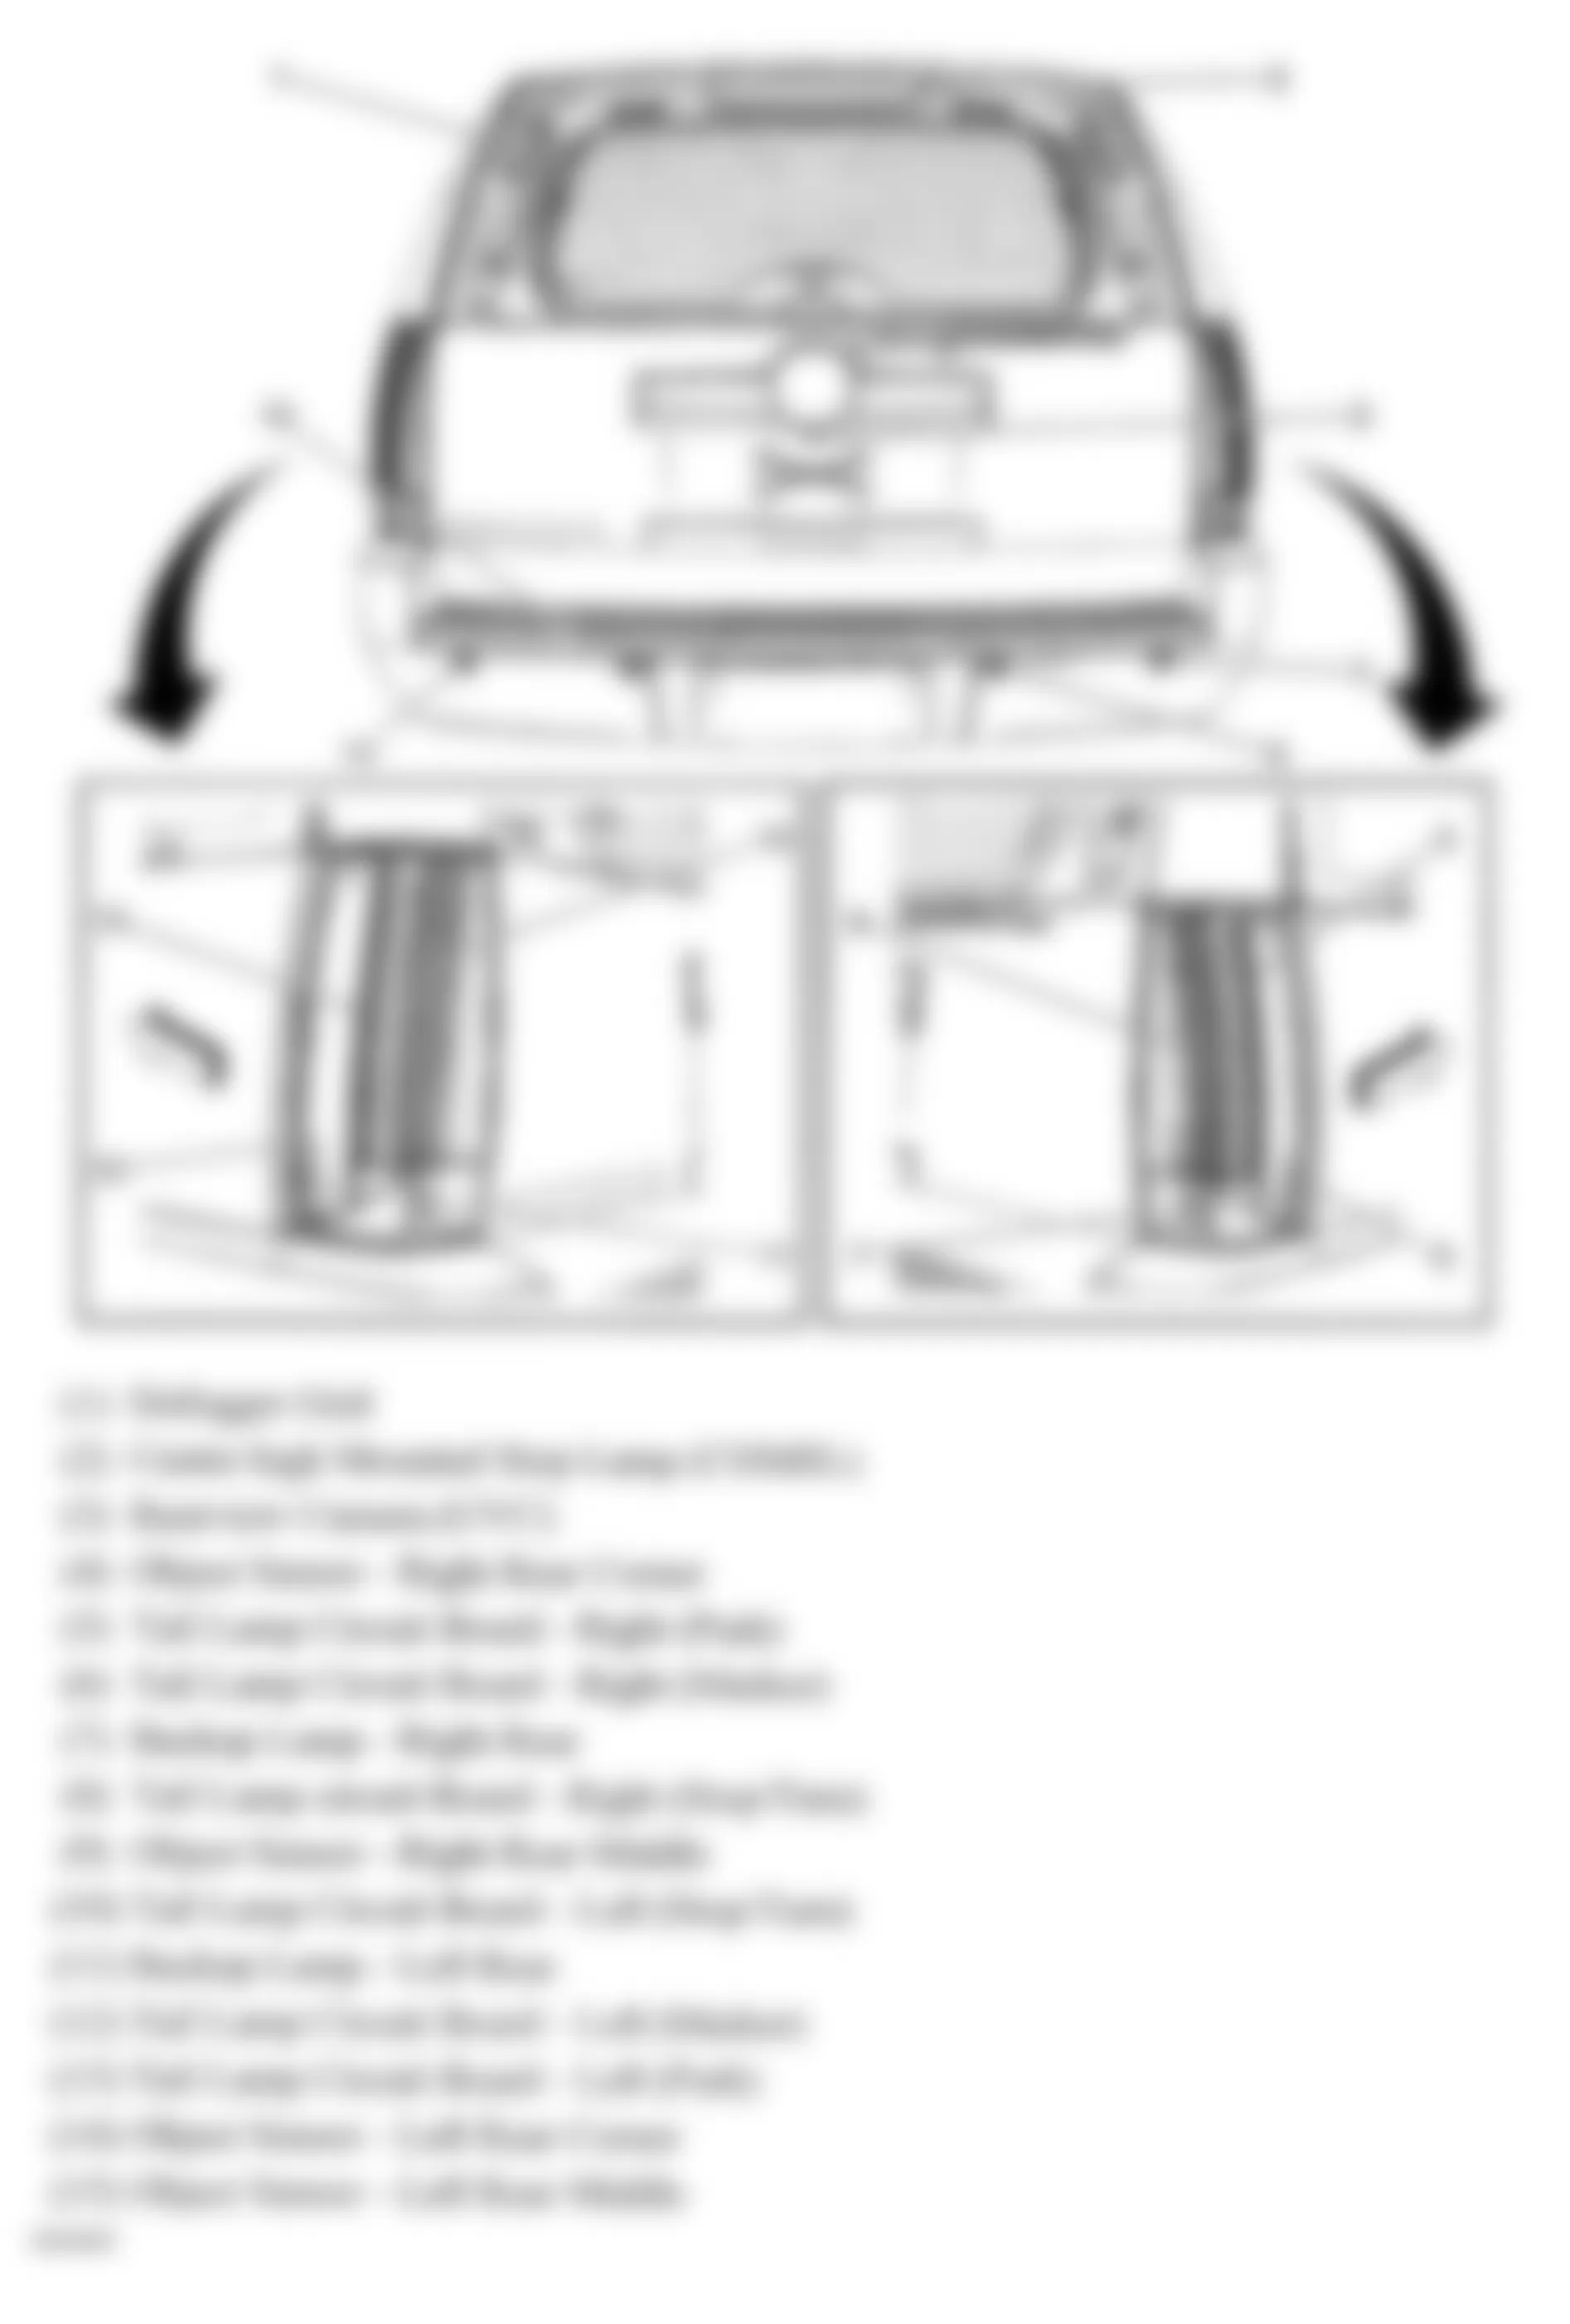 GMC Yukon XL K1500 2007 - Component Locations -  Rear Of Vehicle (Tahoe & Escalade W/One Piece Liftgate)